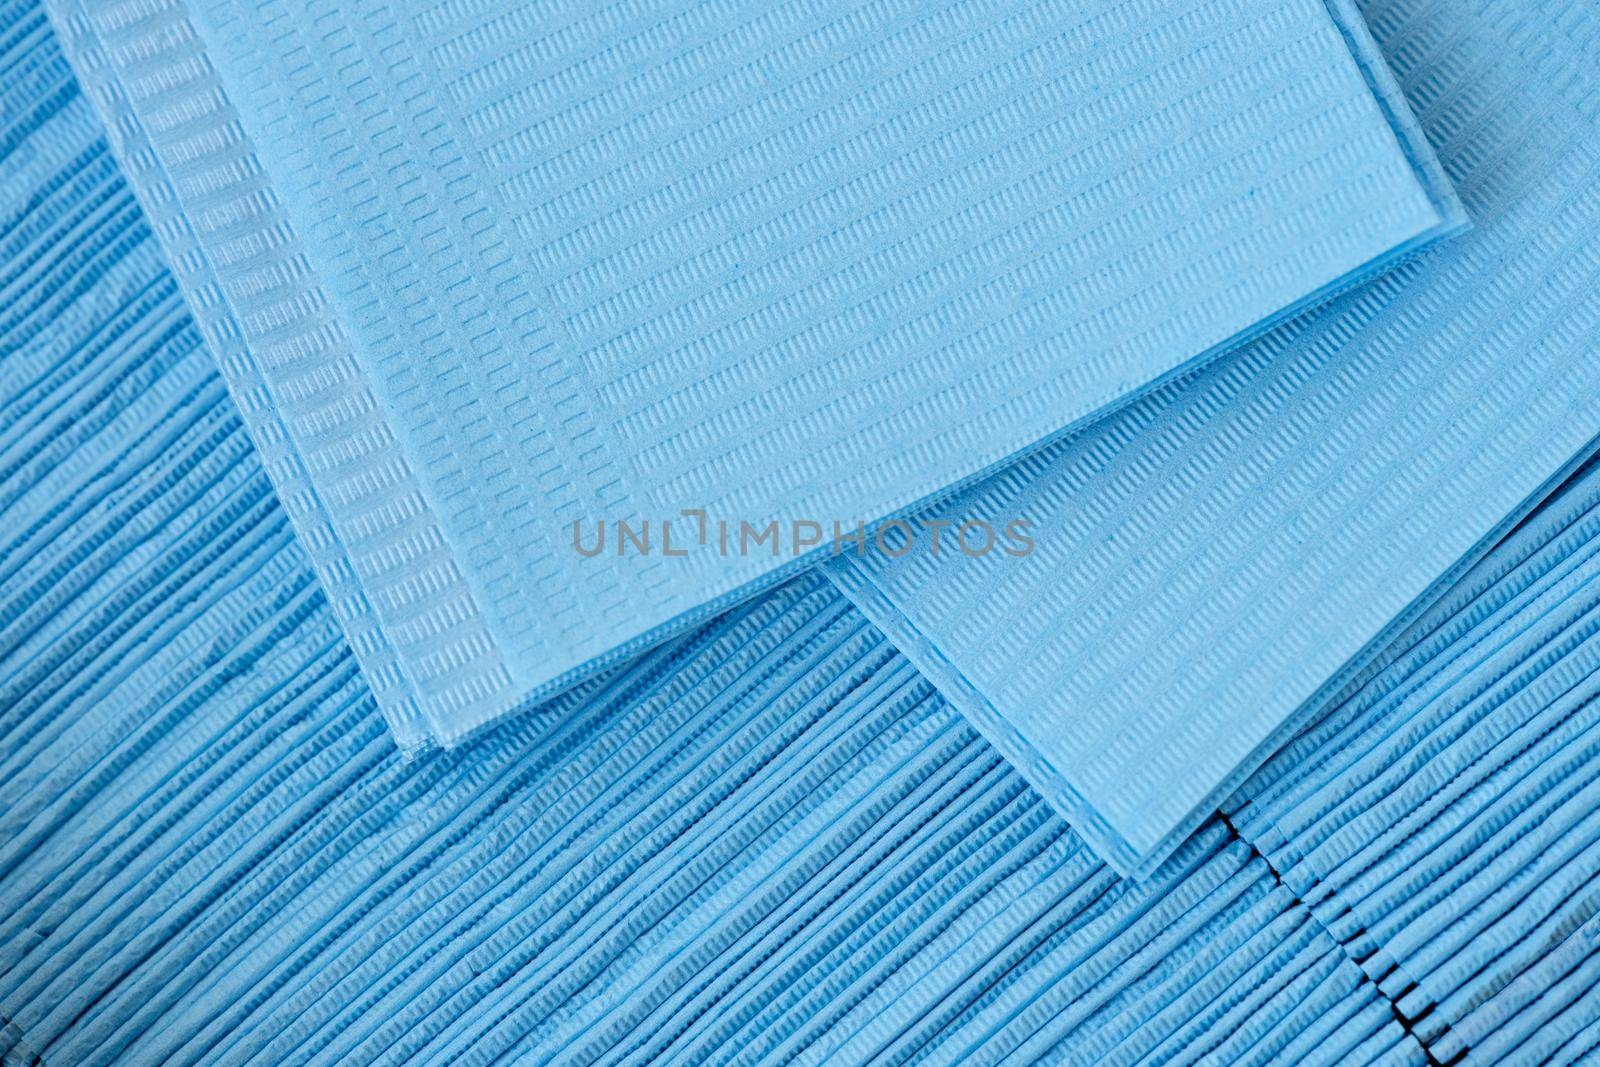 Set of medical disposable napkins for patient examination, close-up. Virus protection during a pandemic, blue paper texture